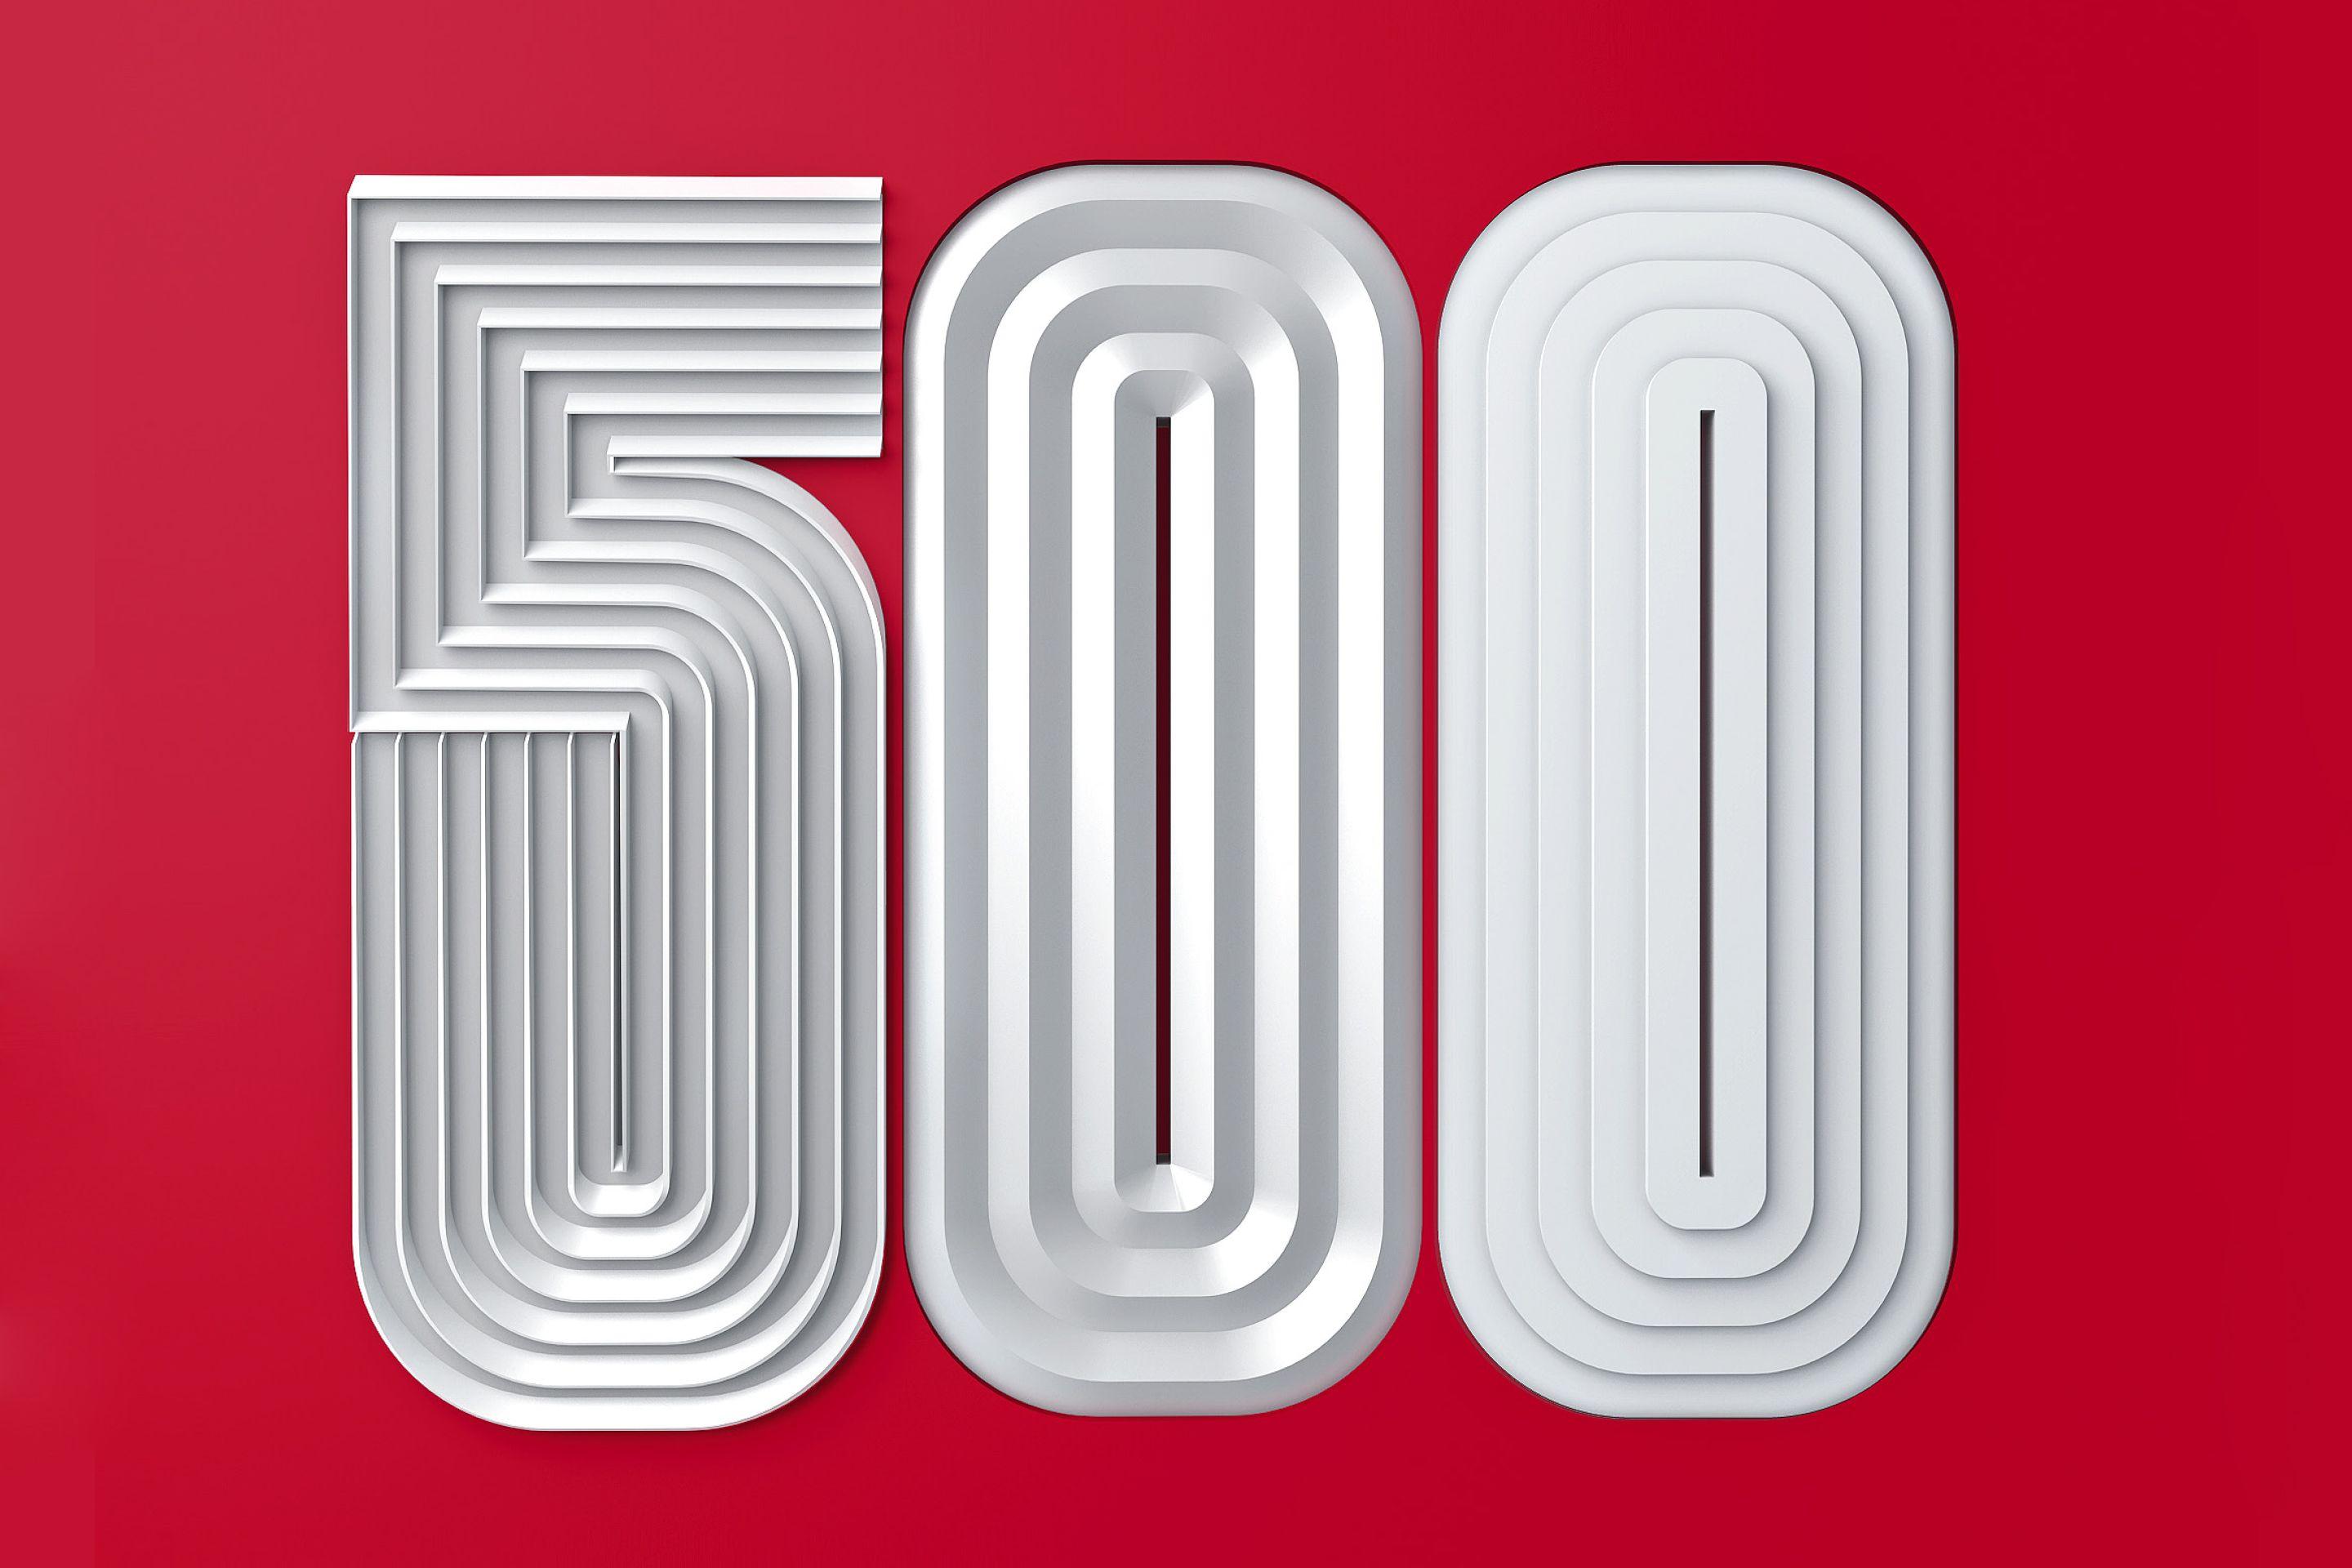 Forbes Fortune 500 Logo - Fortune 500 Companies 2018: Introducing the New List | Fortune